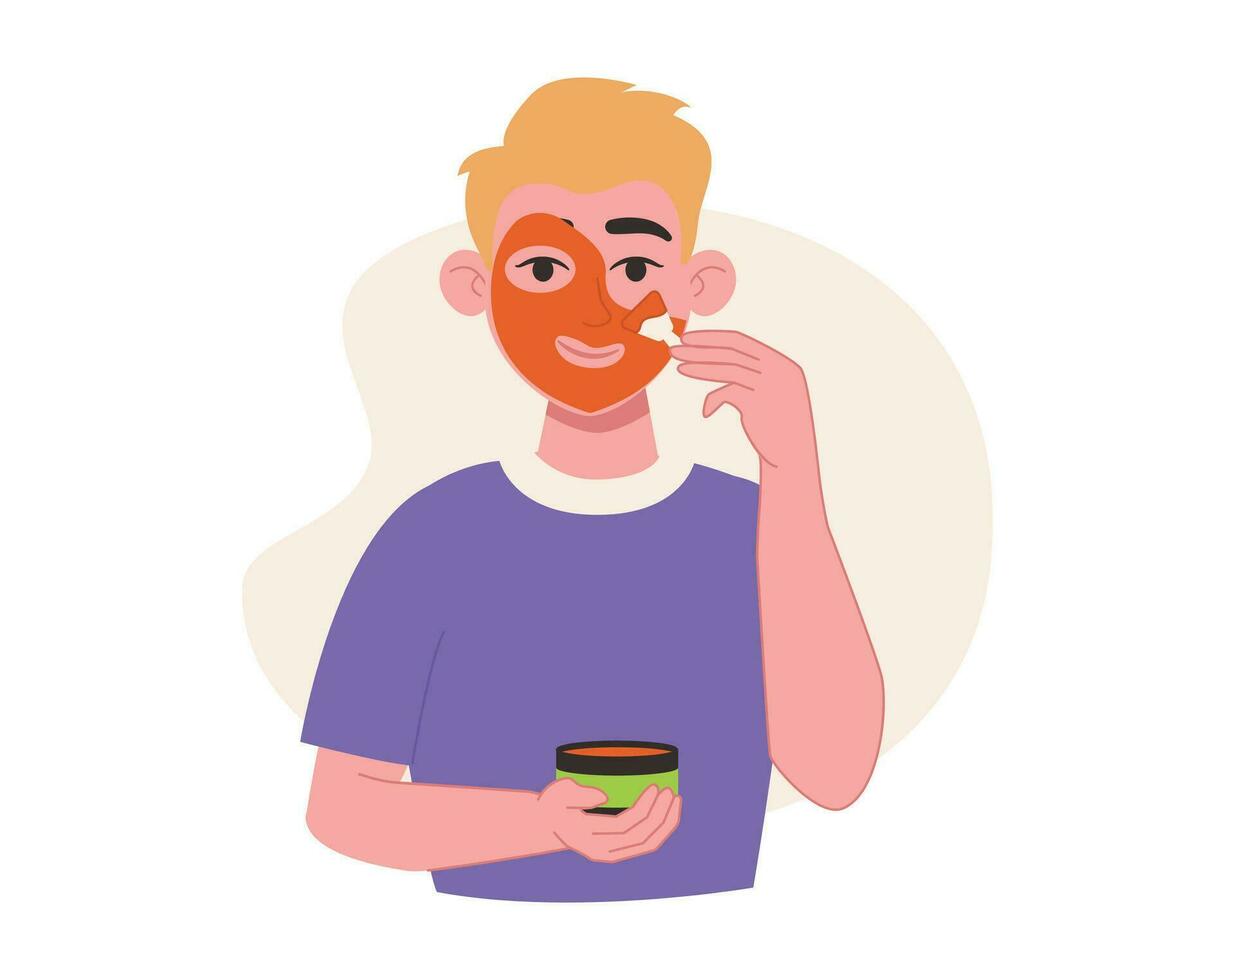 Skin care. Man applies a cosmetic mask on her face with a brush. Vector graphic.